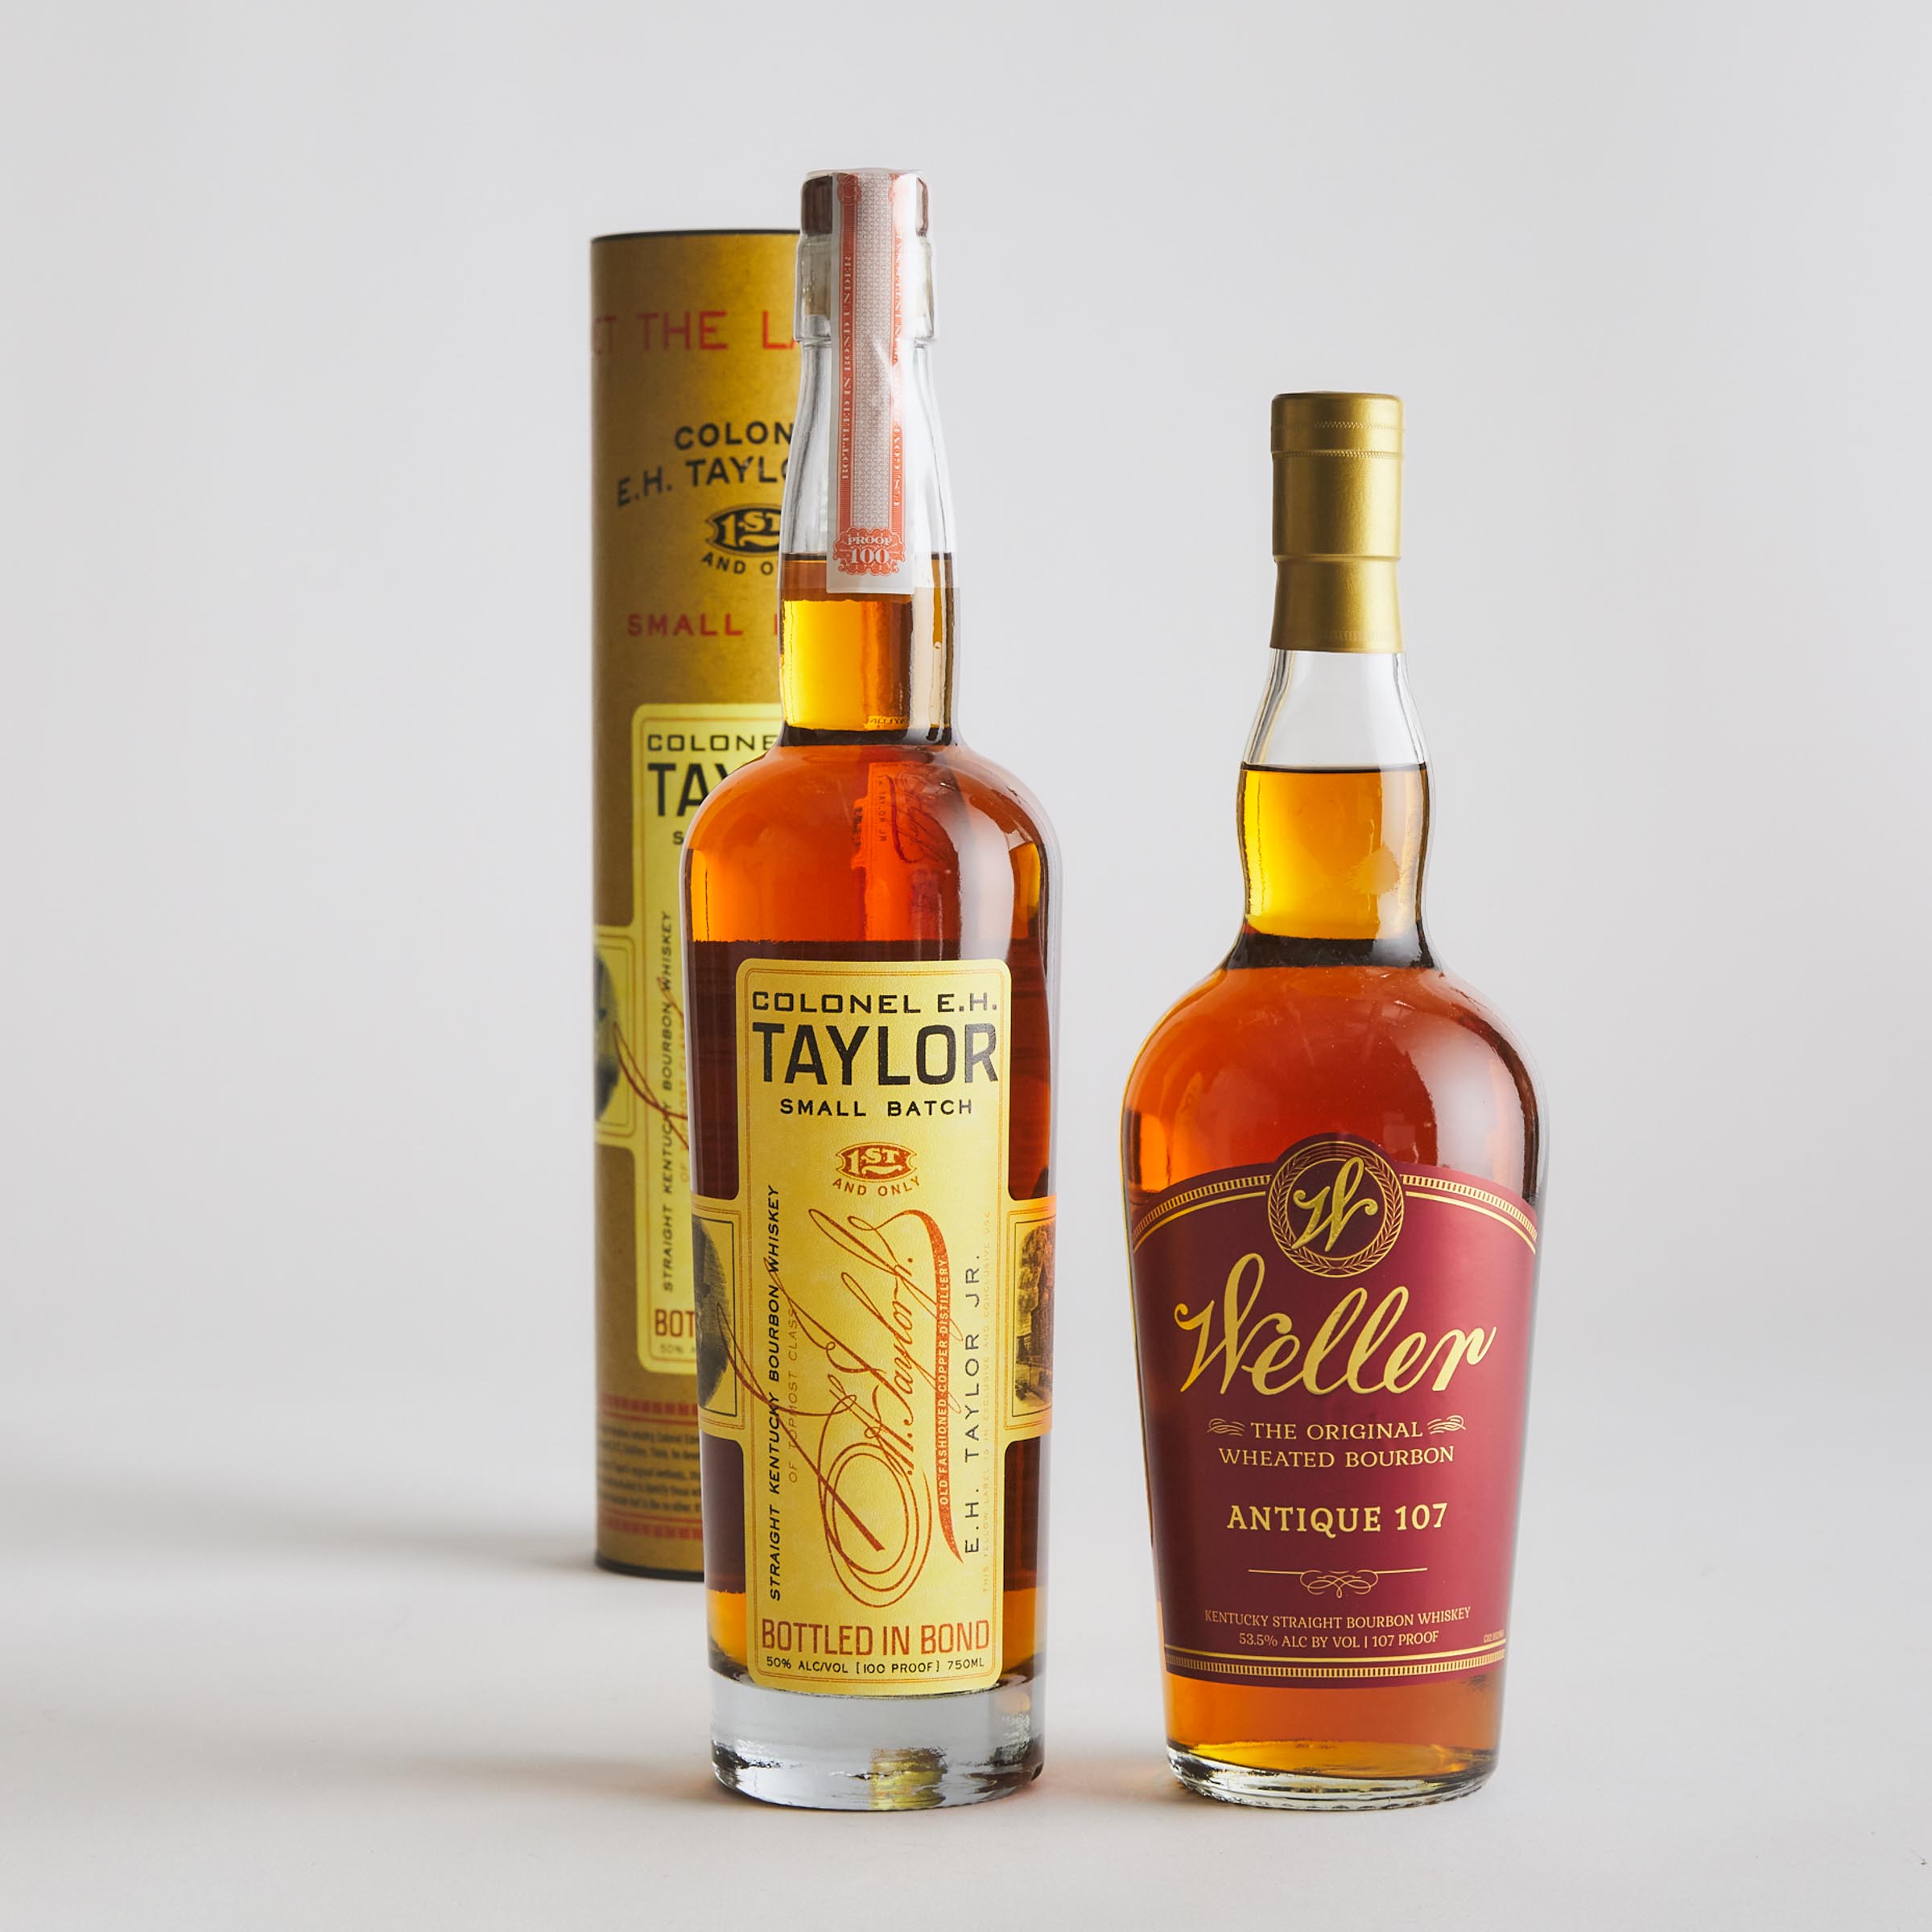 COLONEL E.H.TAYLOR JR. SMALL BATCH STRAIGHT KENTUCKY BOURBON WHISKEY (ONE 750 ML)
WELLER ANTIQUE 107 ORIGINAL WHEATED BOURBON WHISKEY NAS (ONE 750 ML)